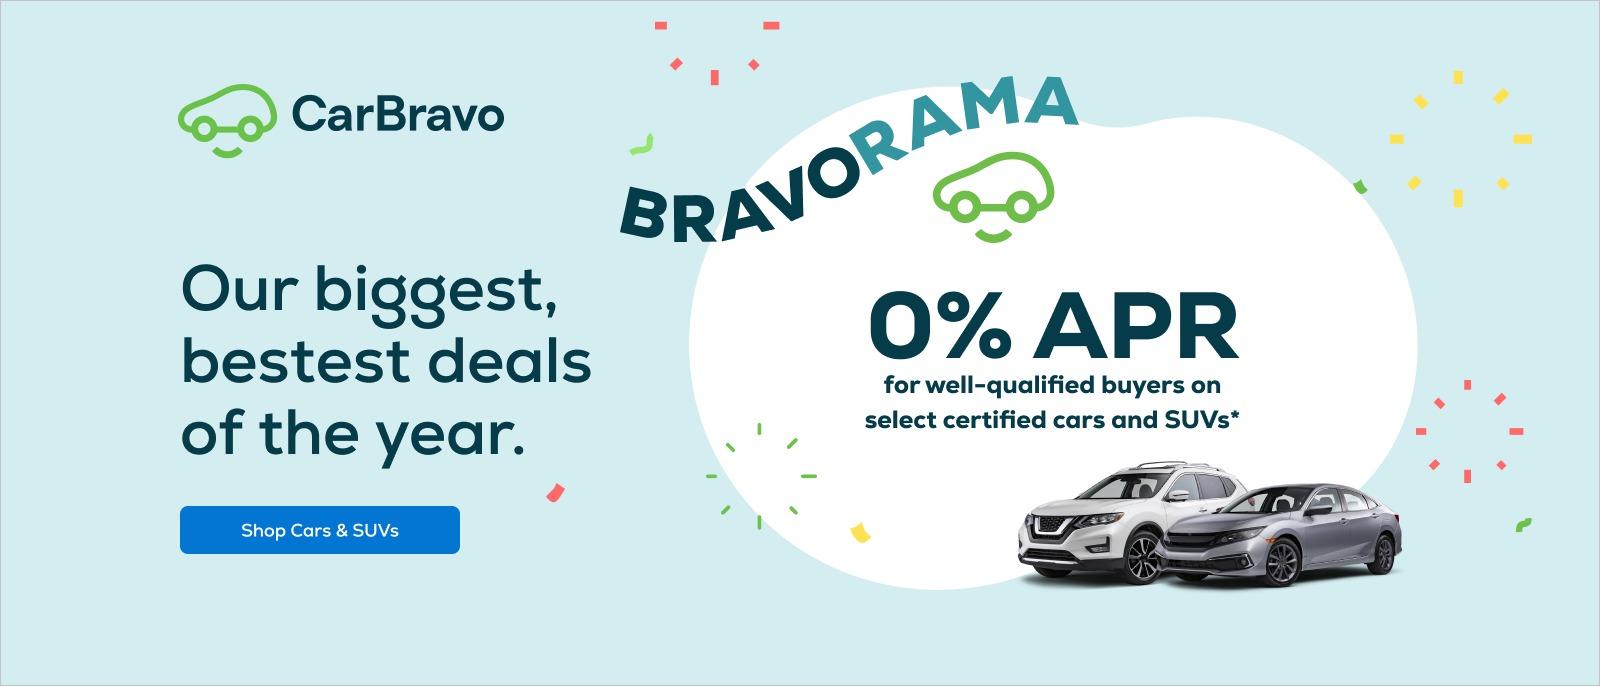 BRAVORAMA 0% FOR WELL QUALIFIED BUYERS